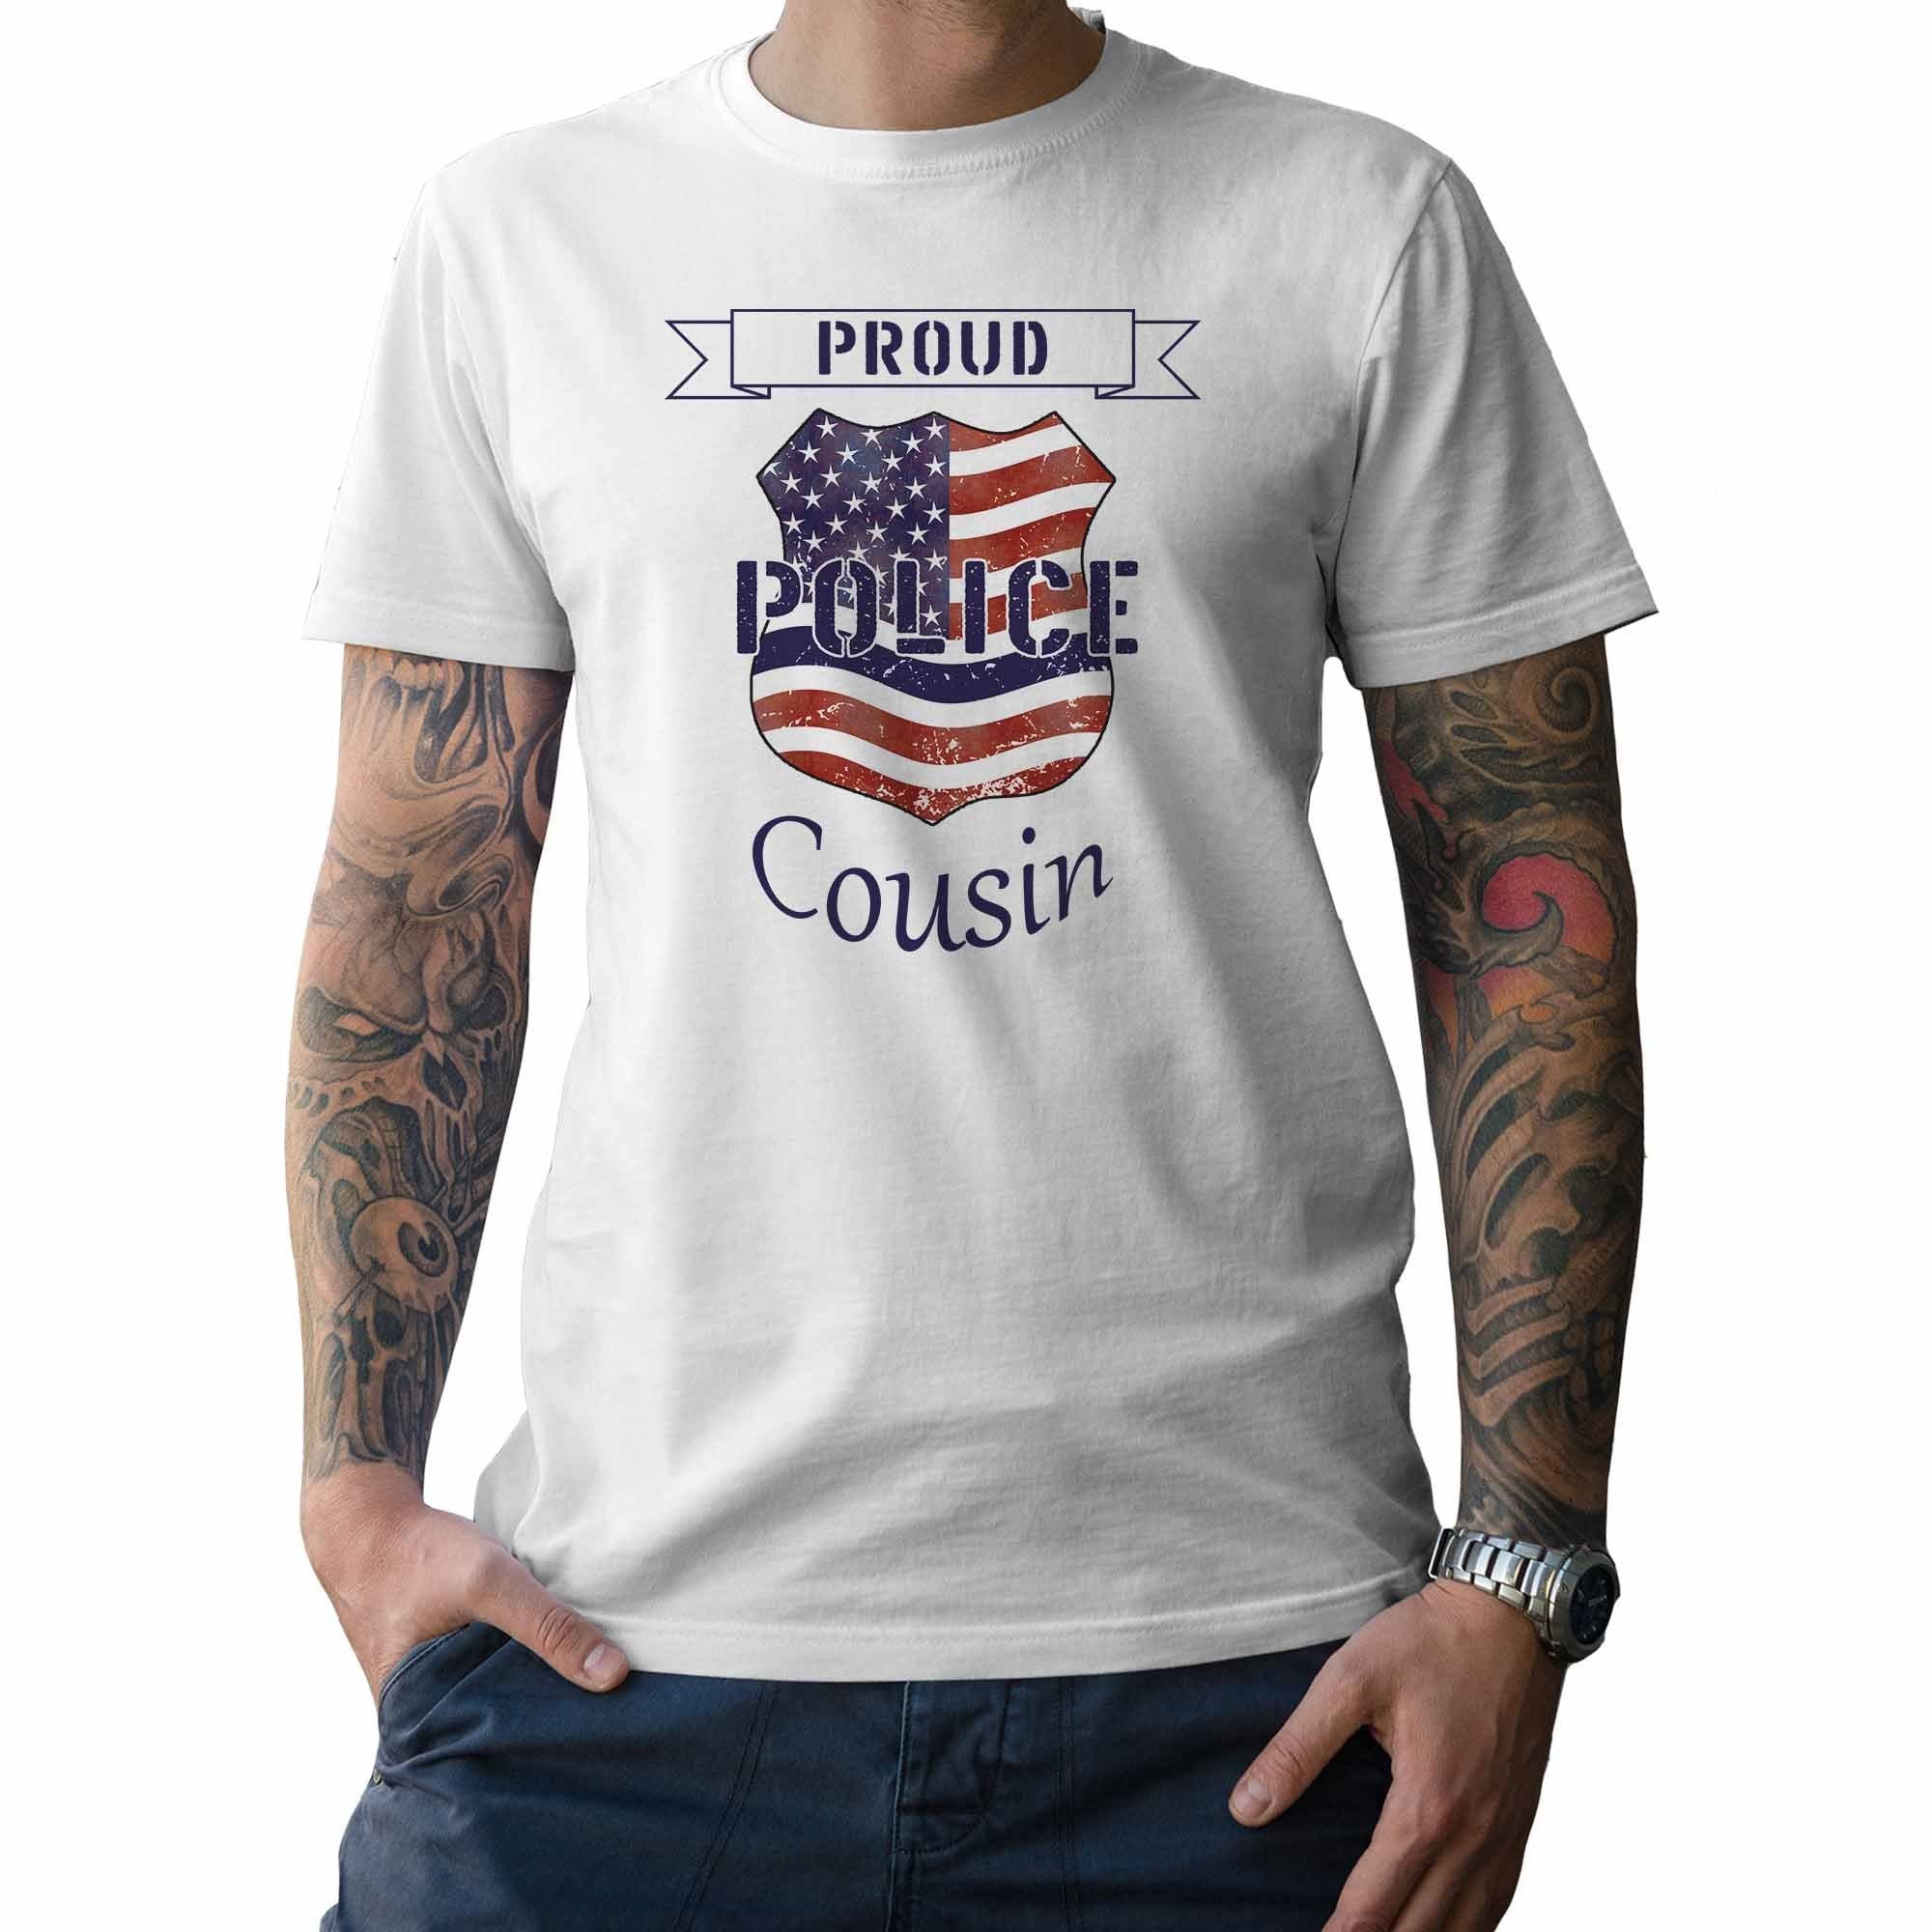 Proud Police Cousin - My Custom Tee Party